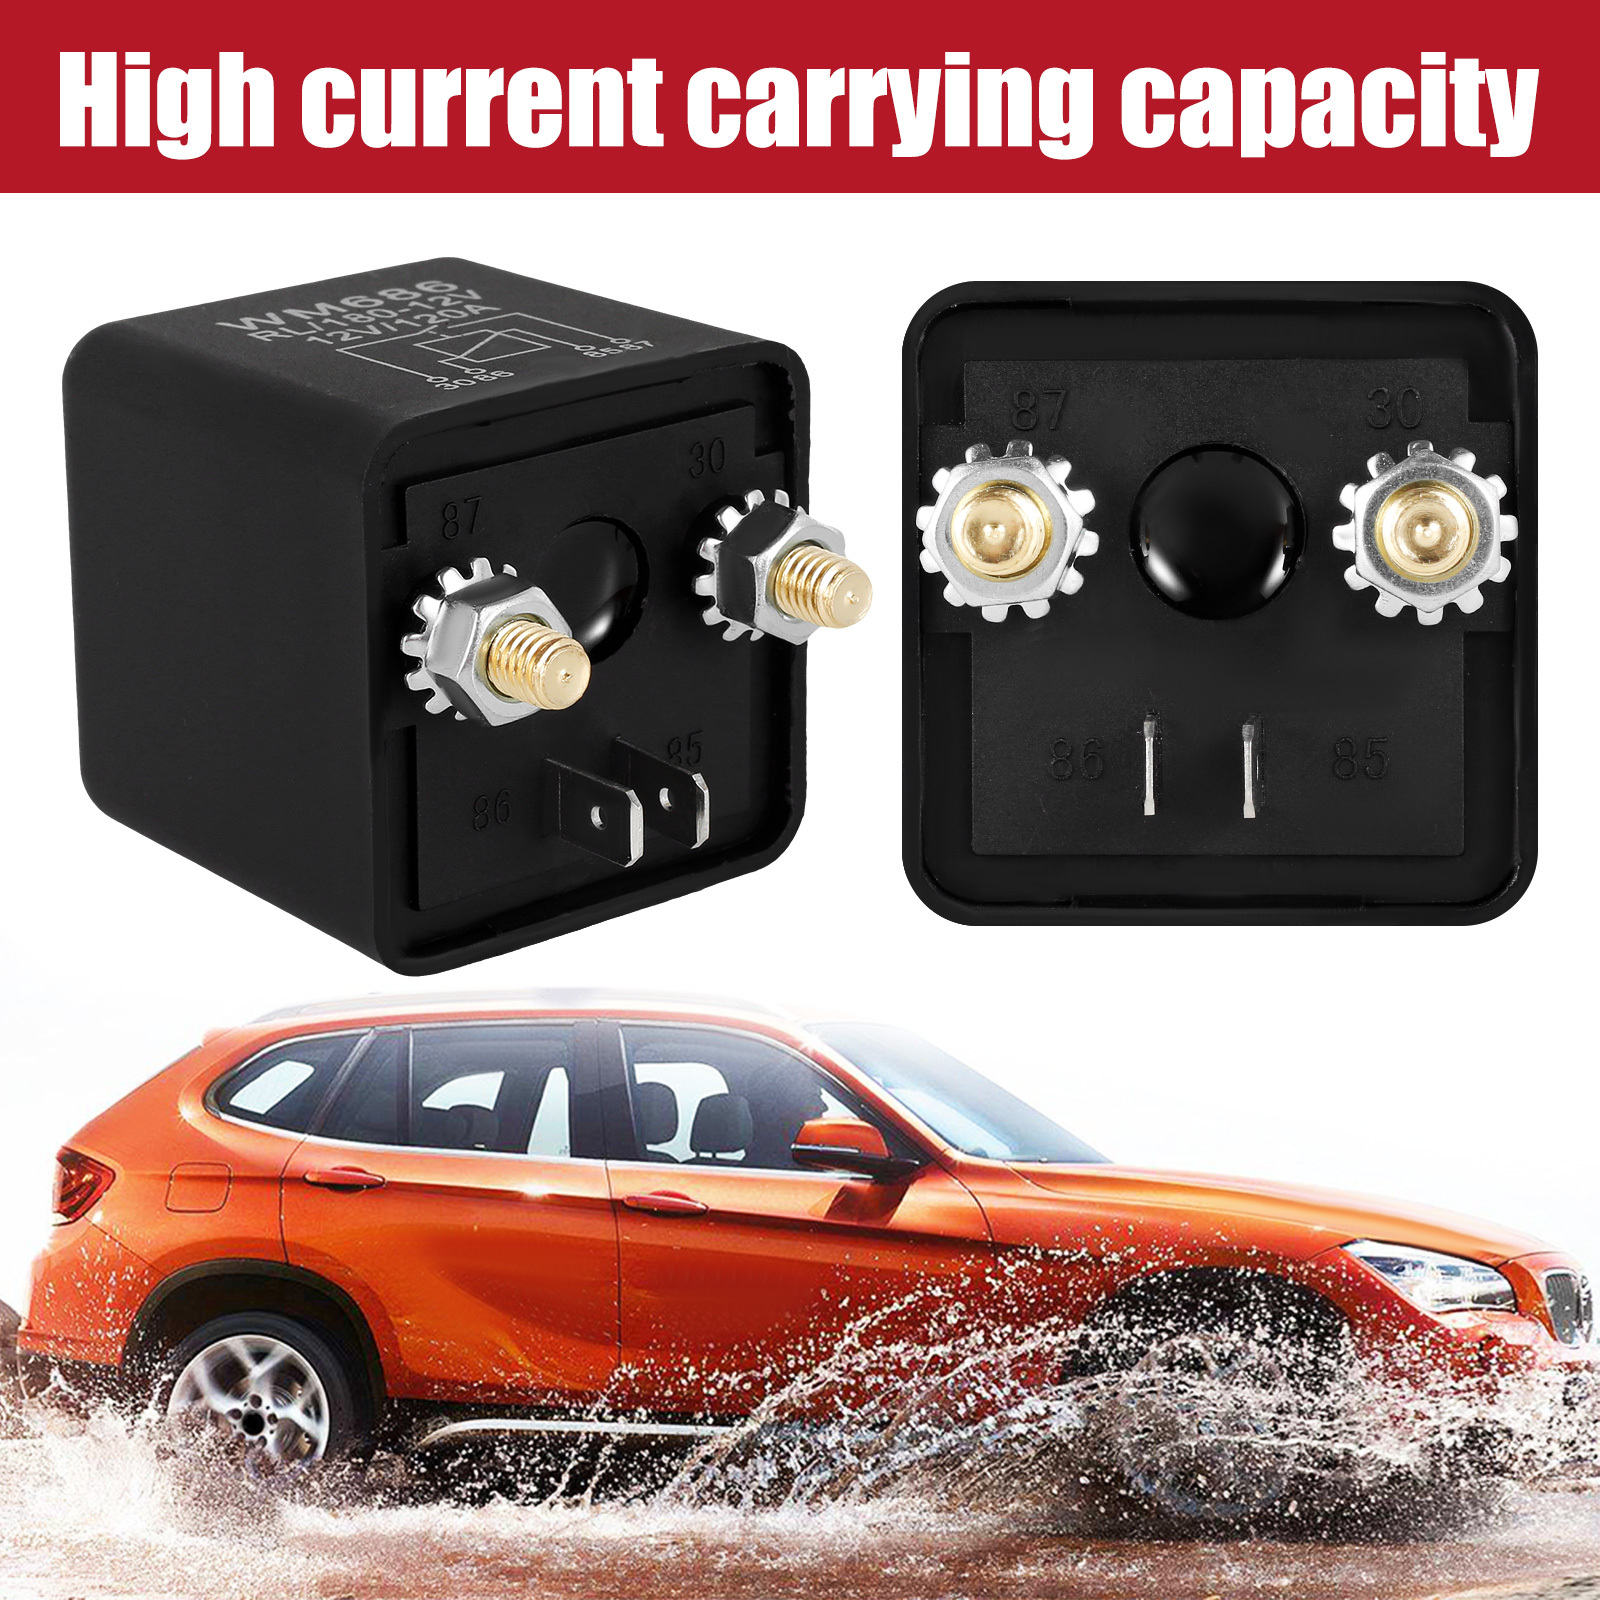 relay switch 12v 120a high current starter relay high power on off strong conductivity continuous duty relay car accessories for truck boat marine